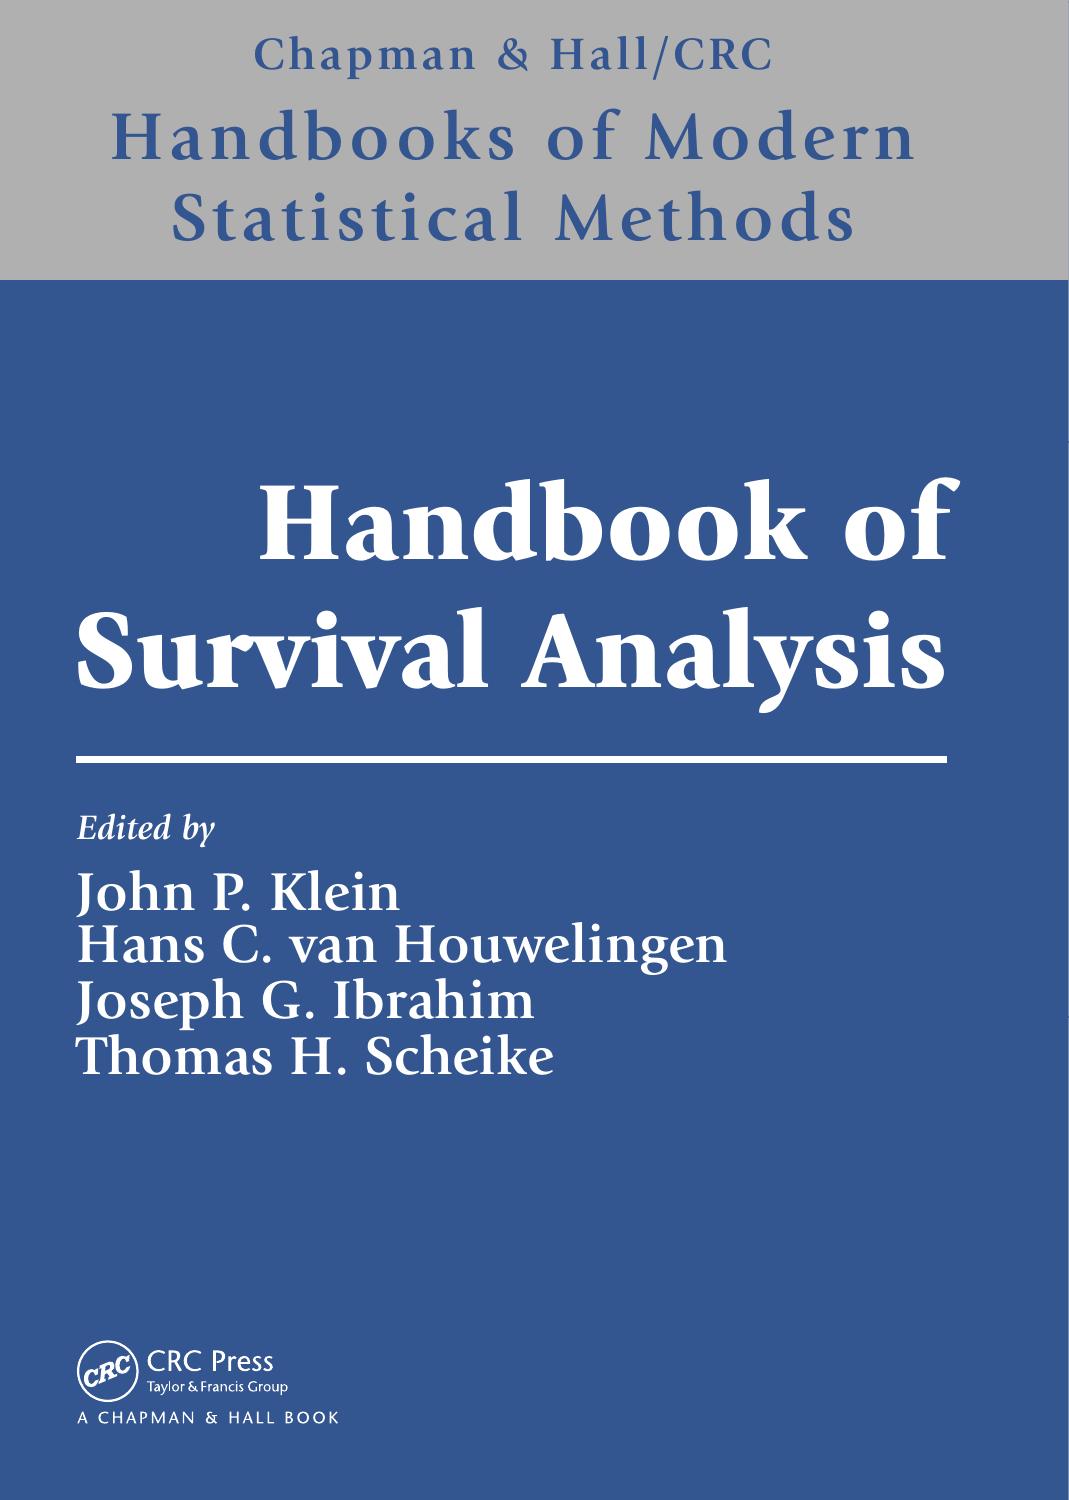 survival analysis by john p. klein and melvin solution